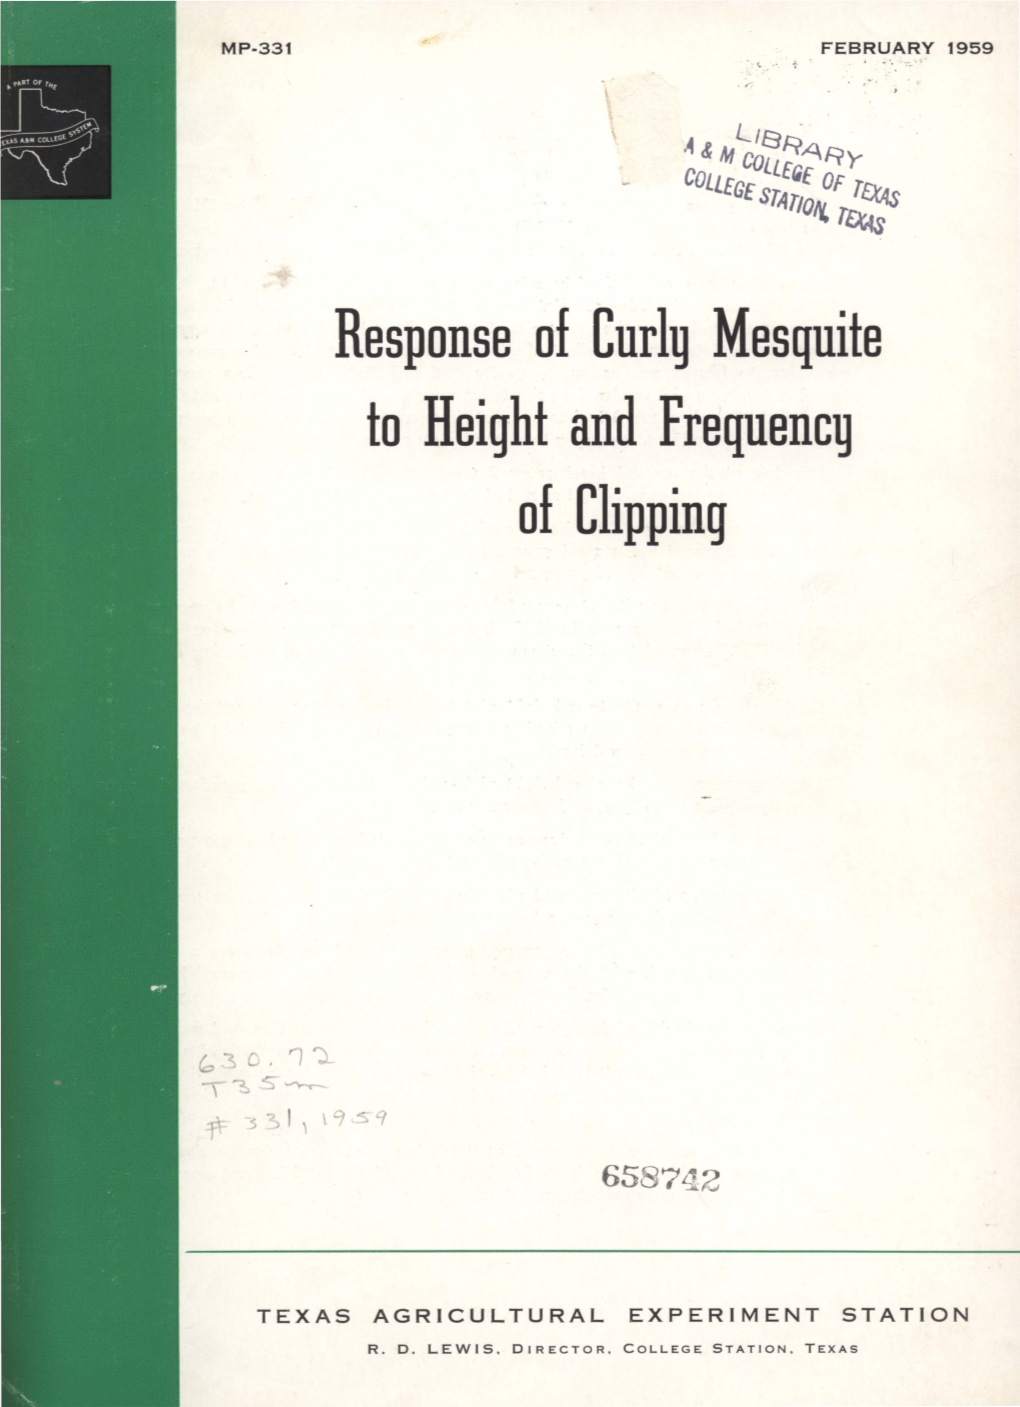 Response of Curly Mesquite to Height and Frequency of Clipping